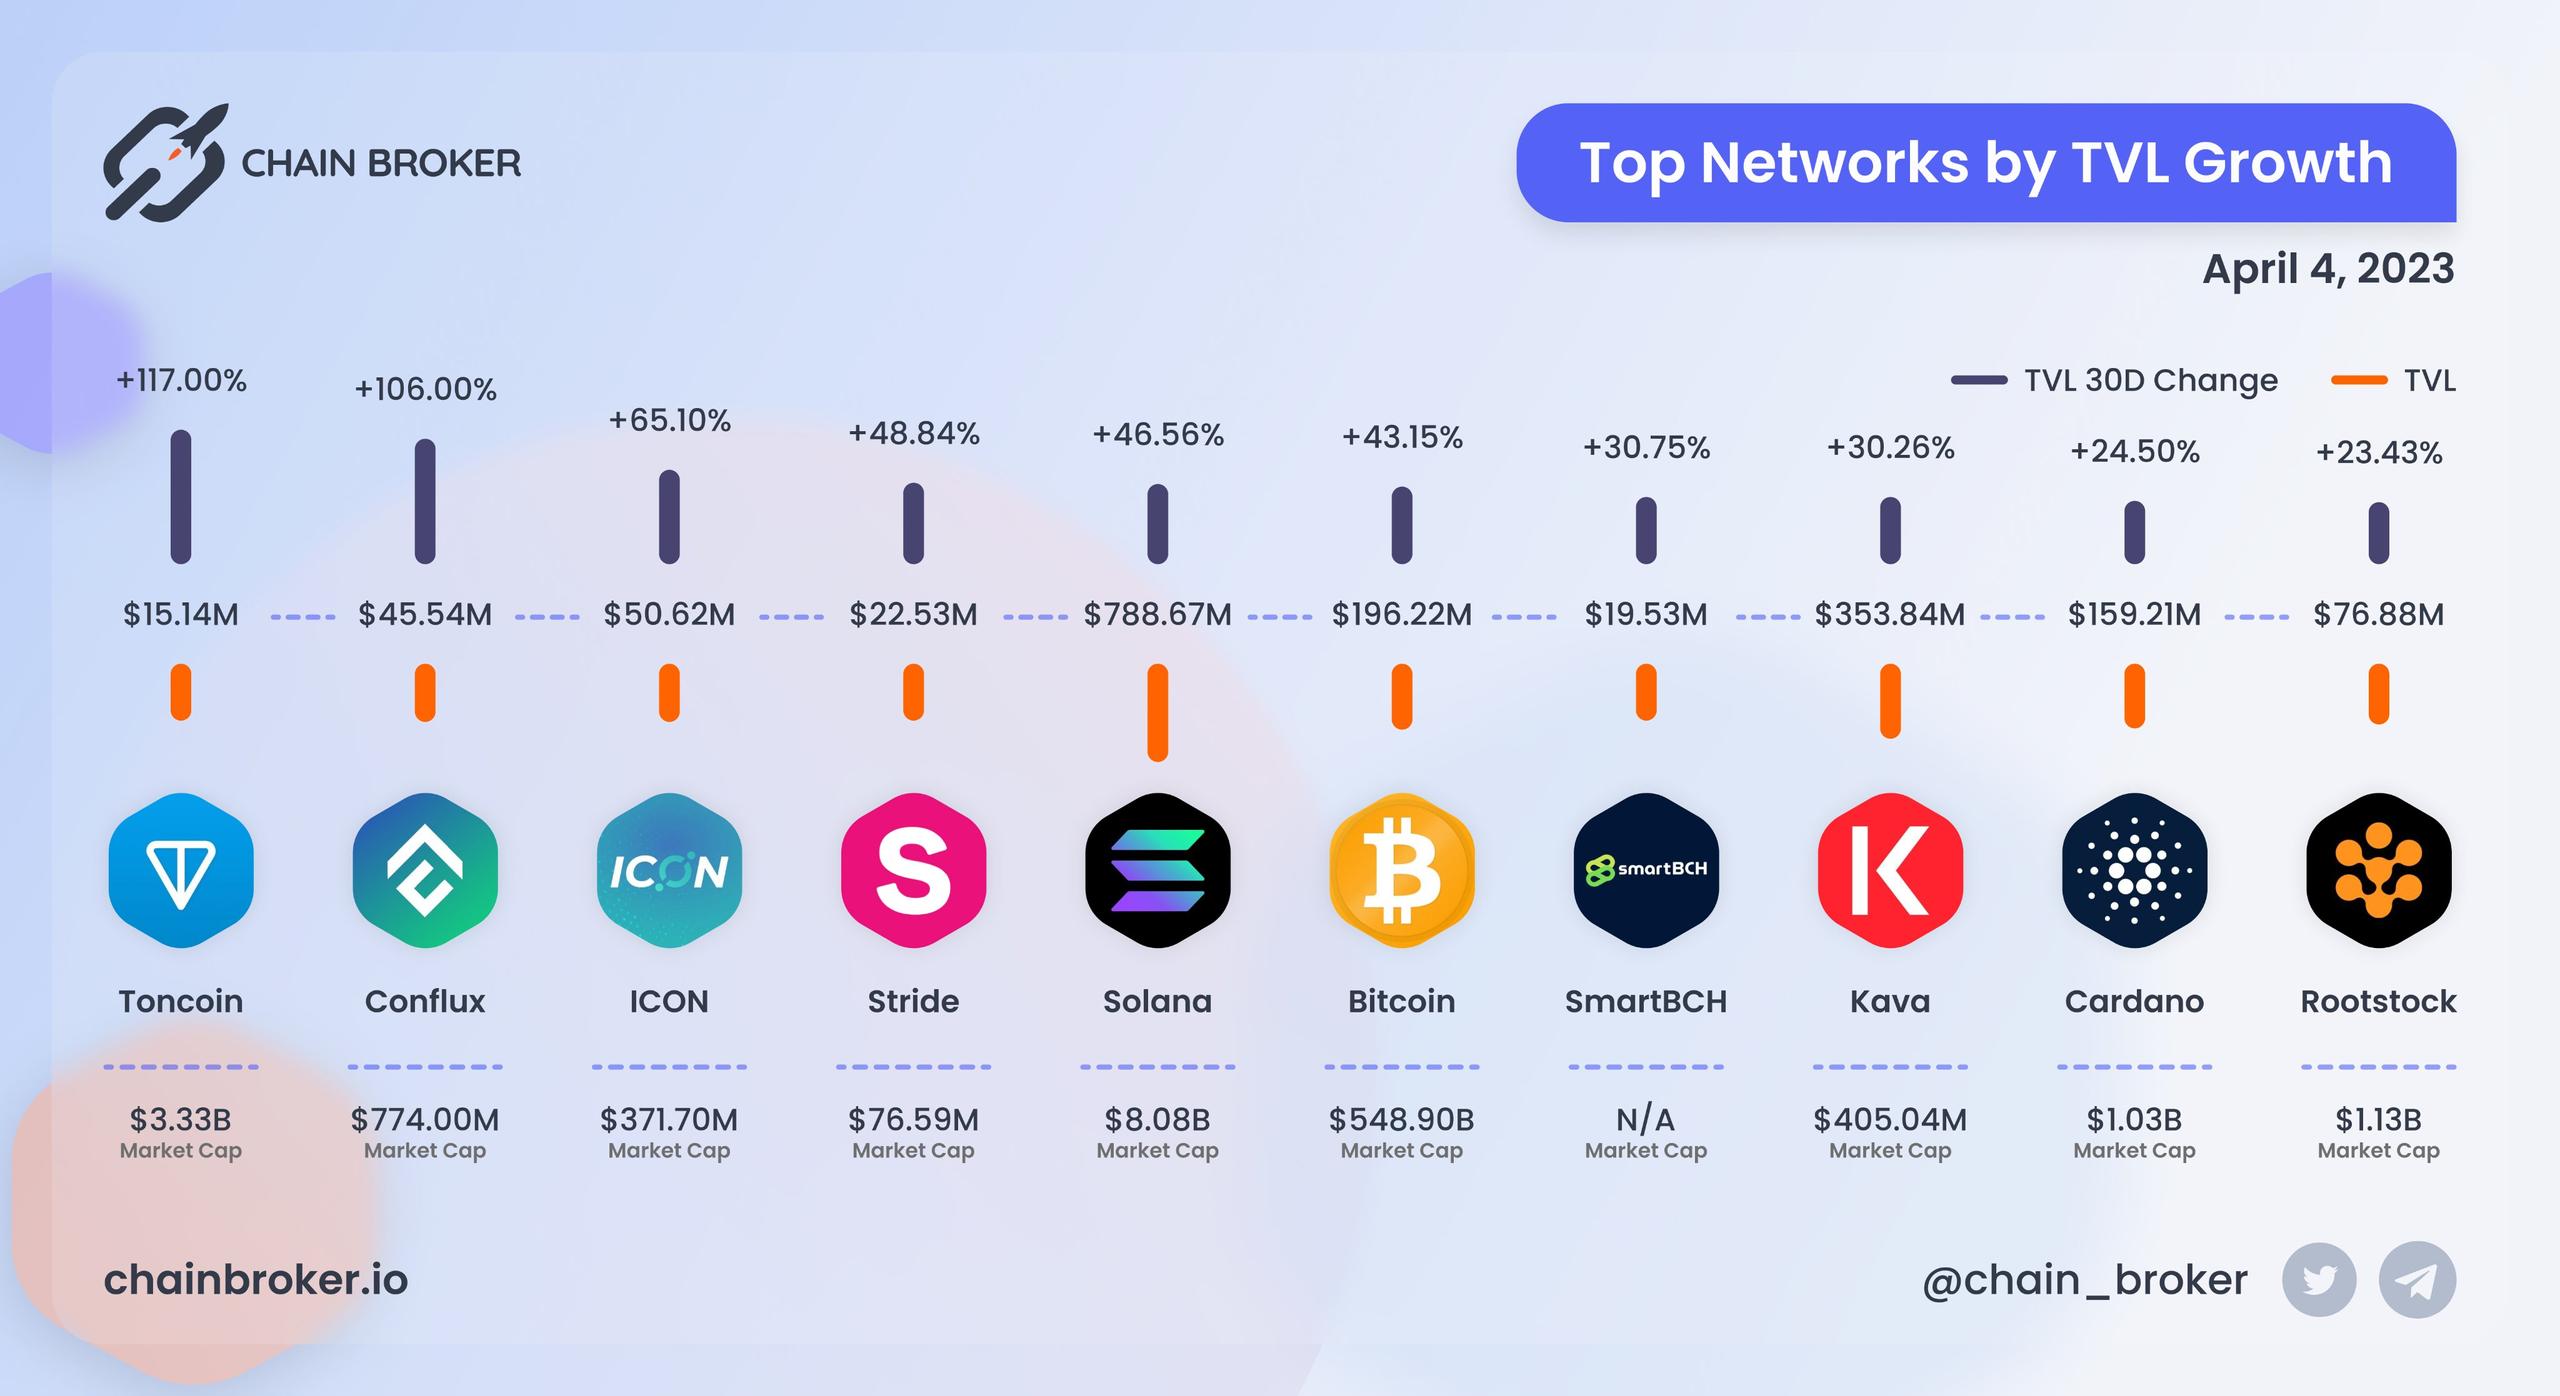 Top Networks by TVL growth